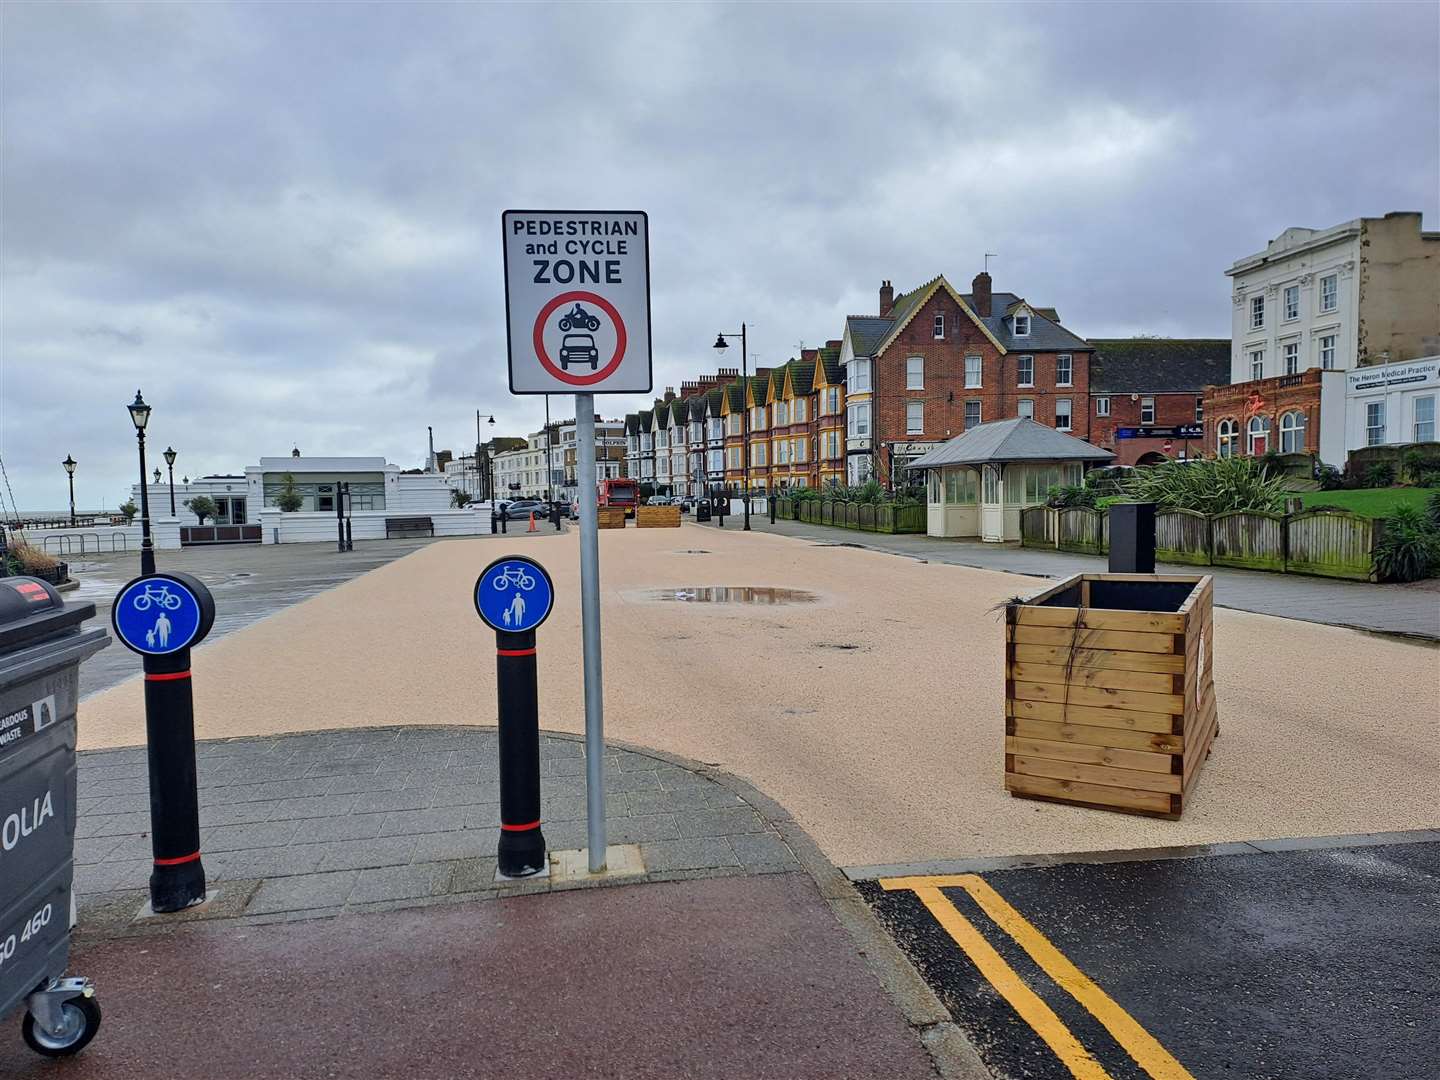 It formed part of a £600,000 project to encourage pedestrians to visit Herne Bay